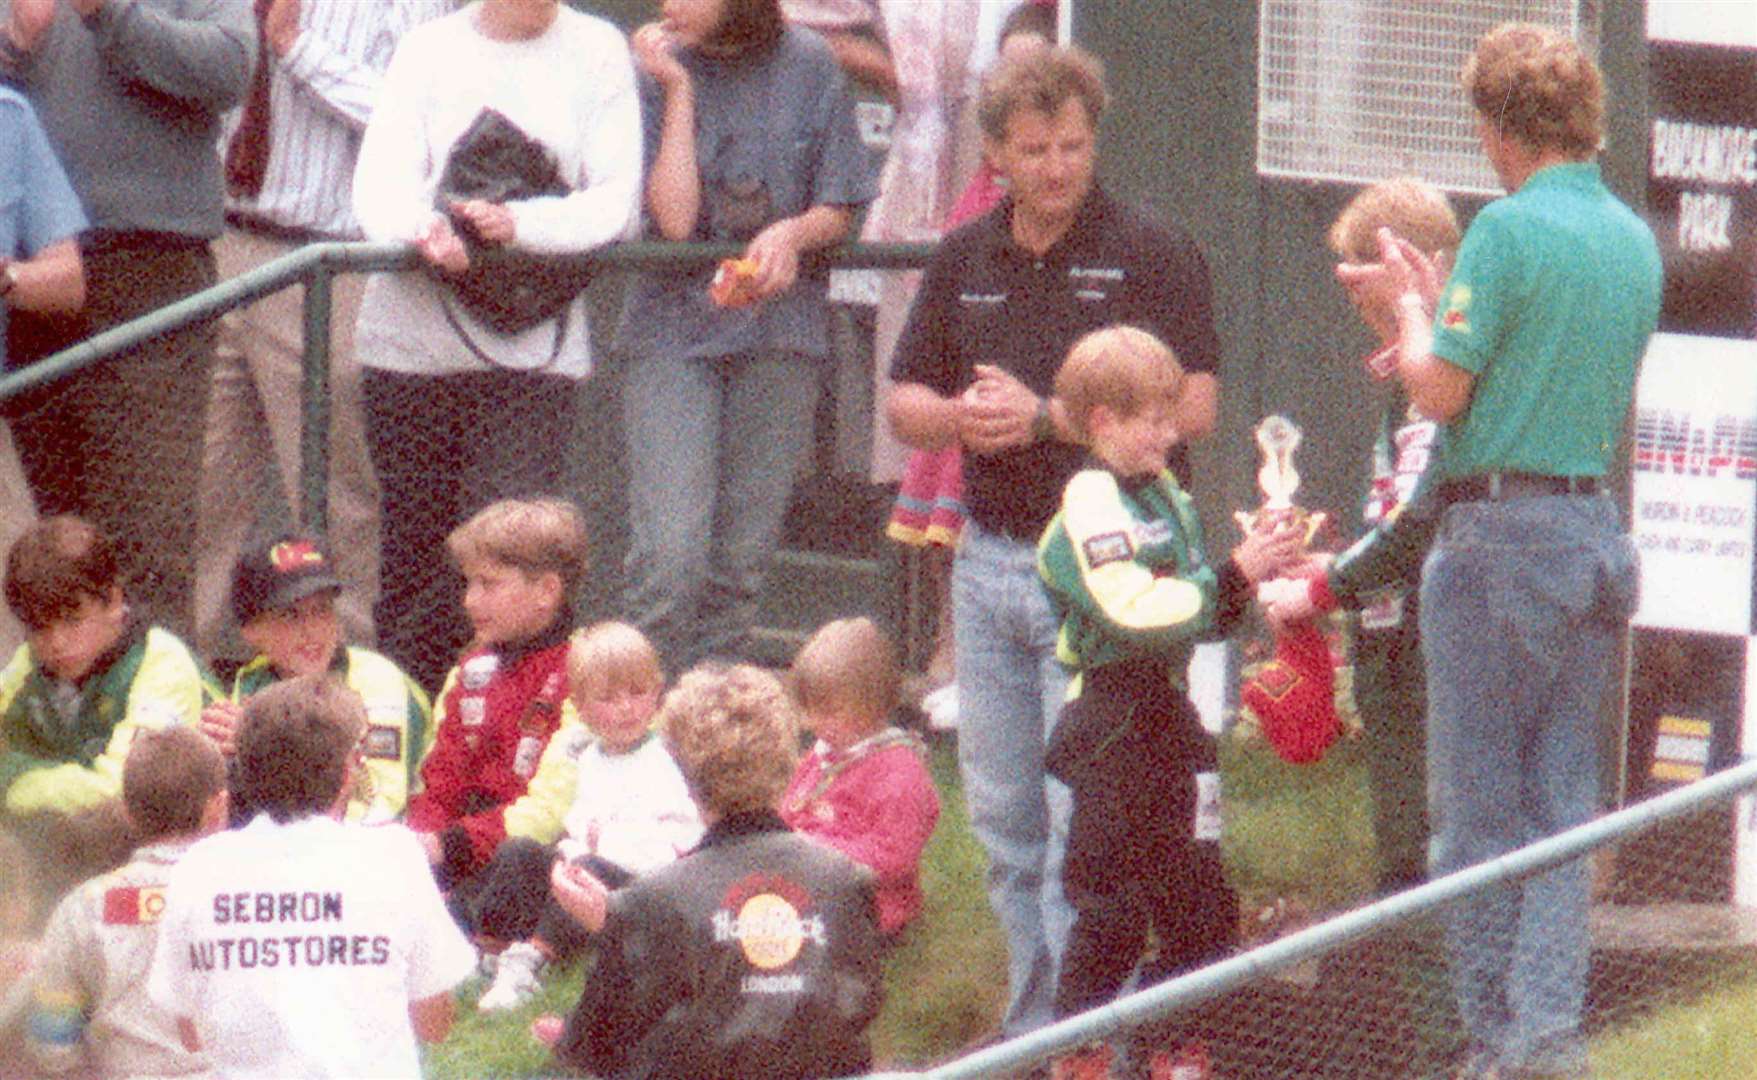 Prince Harry was delighted to be presented with a trophy by Johnny Herbert at Buckmore during his second visit to the circuit in 1993. He was applauded by his brother, Prince William, and his mother, the Princess of Wales, who is seen here with her back to the camera